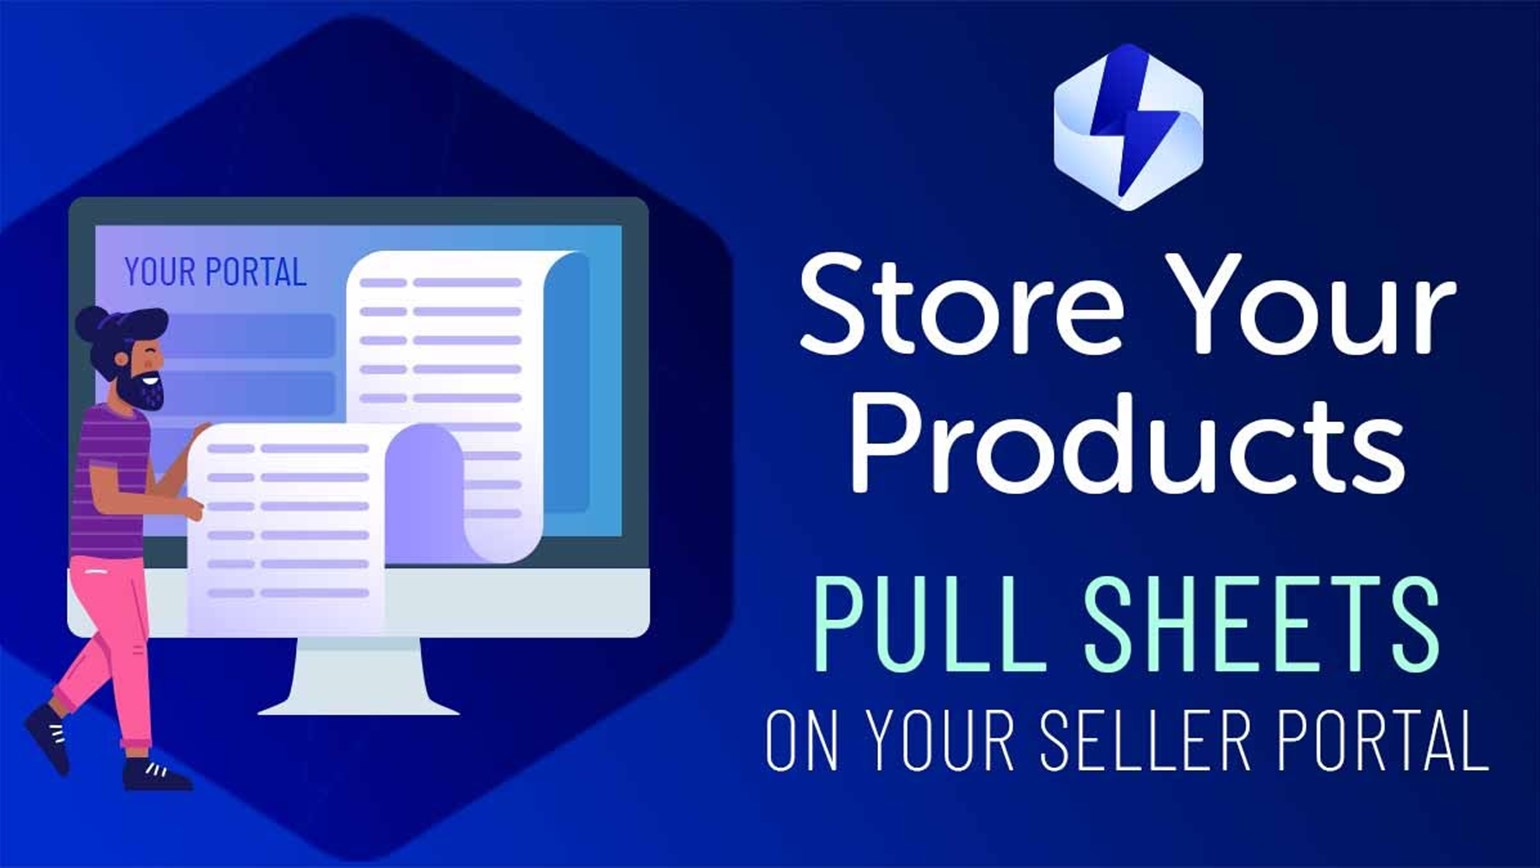 Access the Store Your Products (SYP) Pull Sheet Today